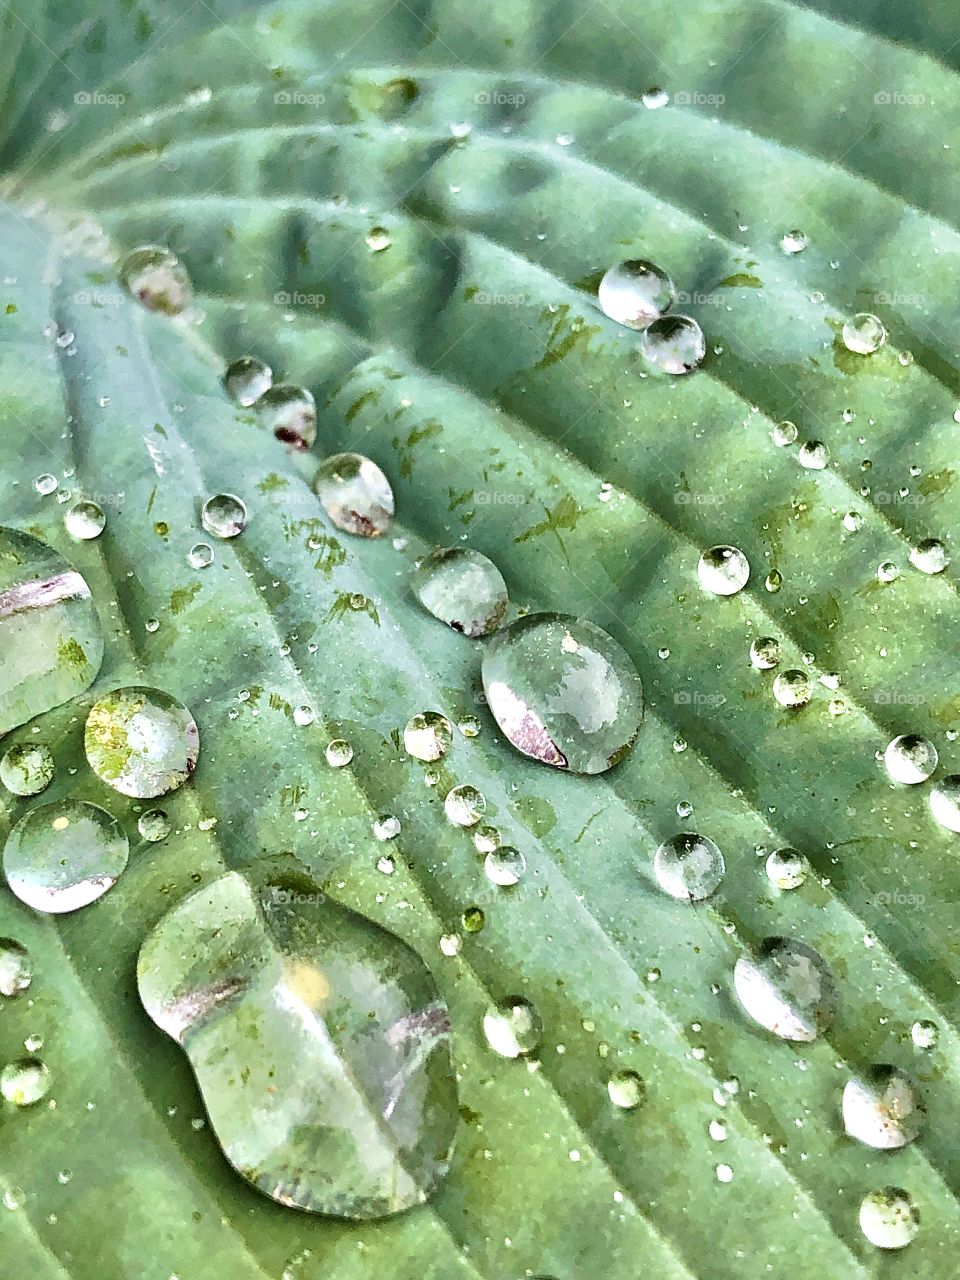 Green leaf with water droplets on surface, closeup, macro photography 